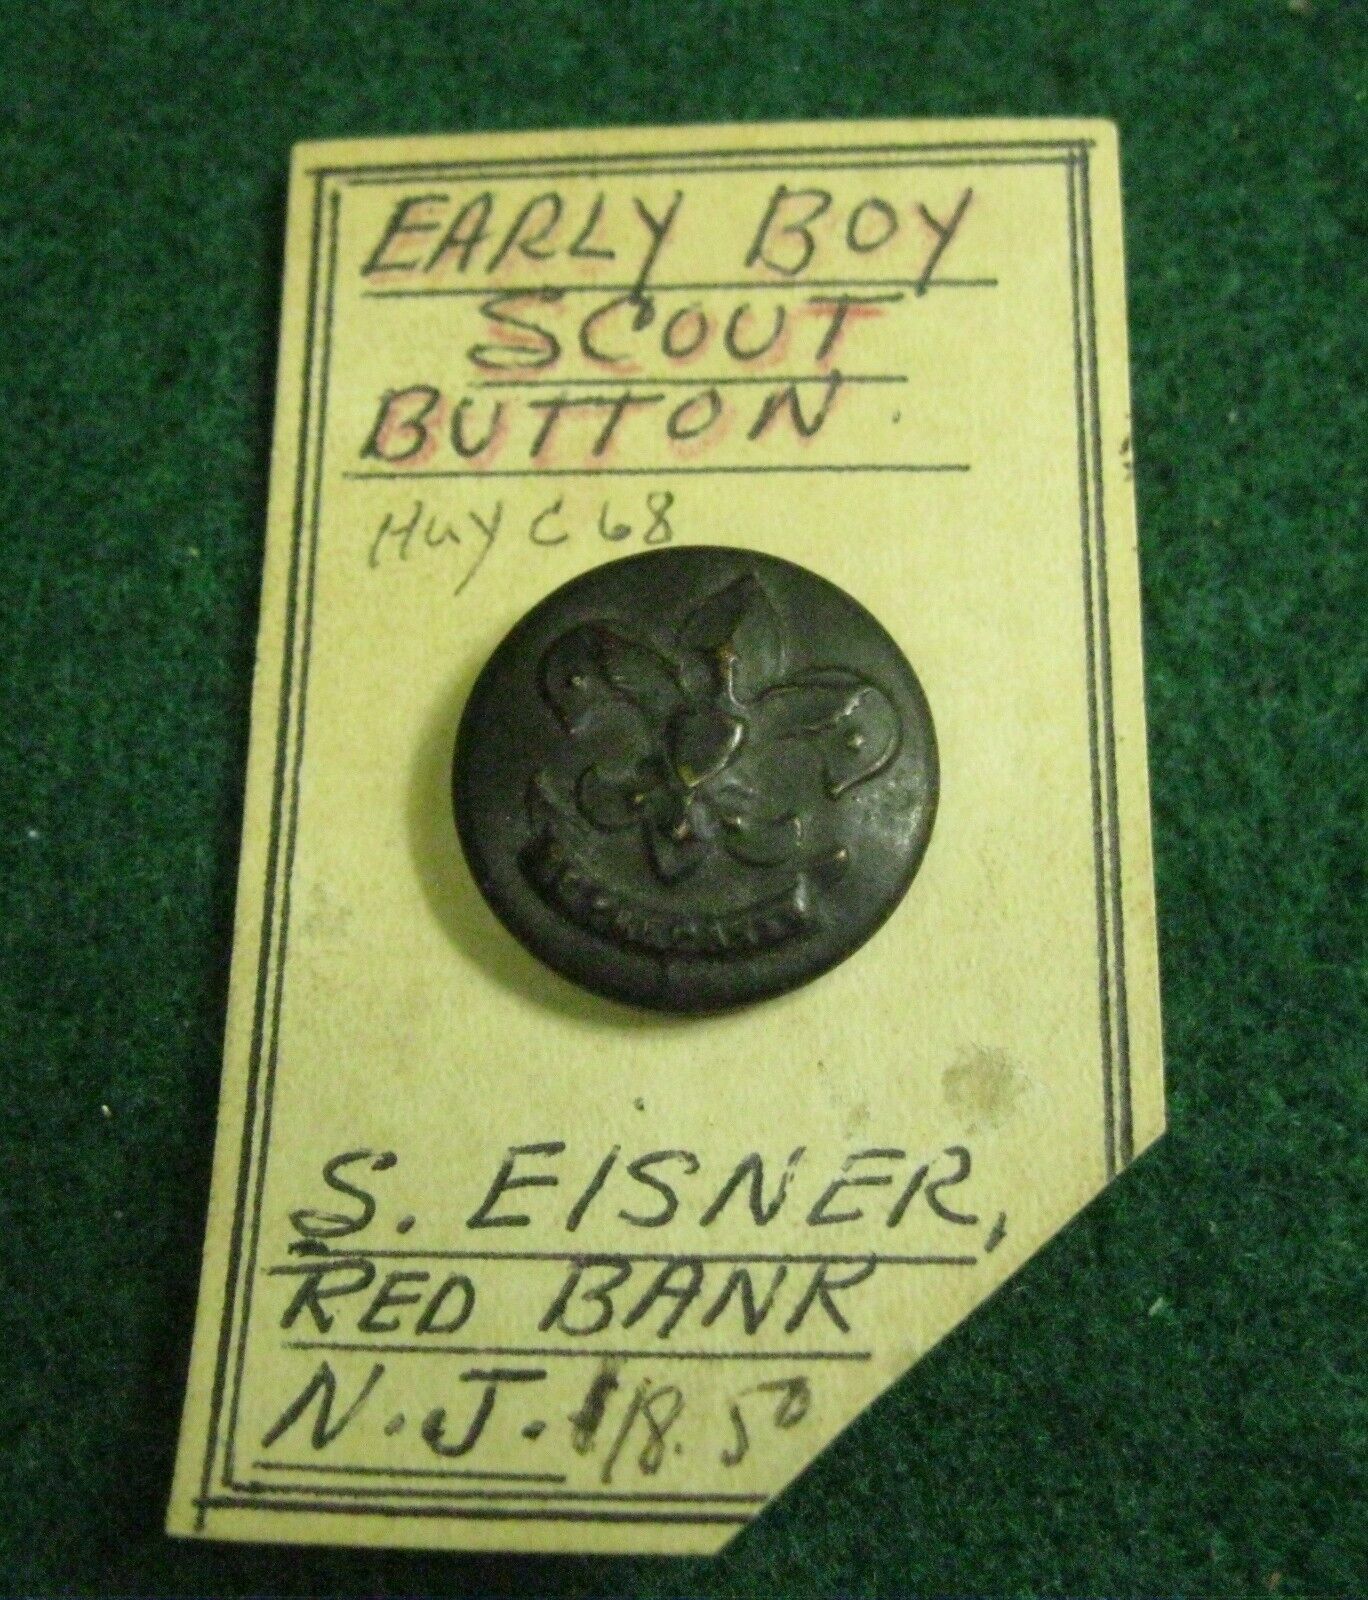 Early Boy Scout Button Eisner, Red Bank, N.J.